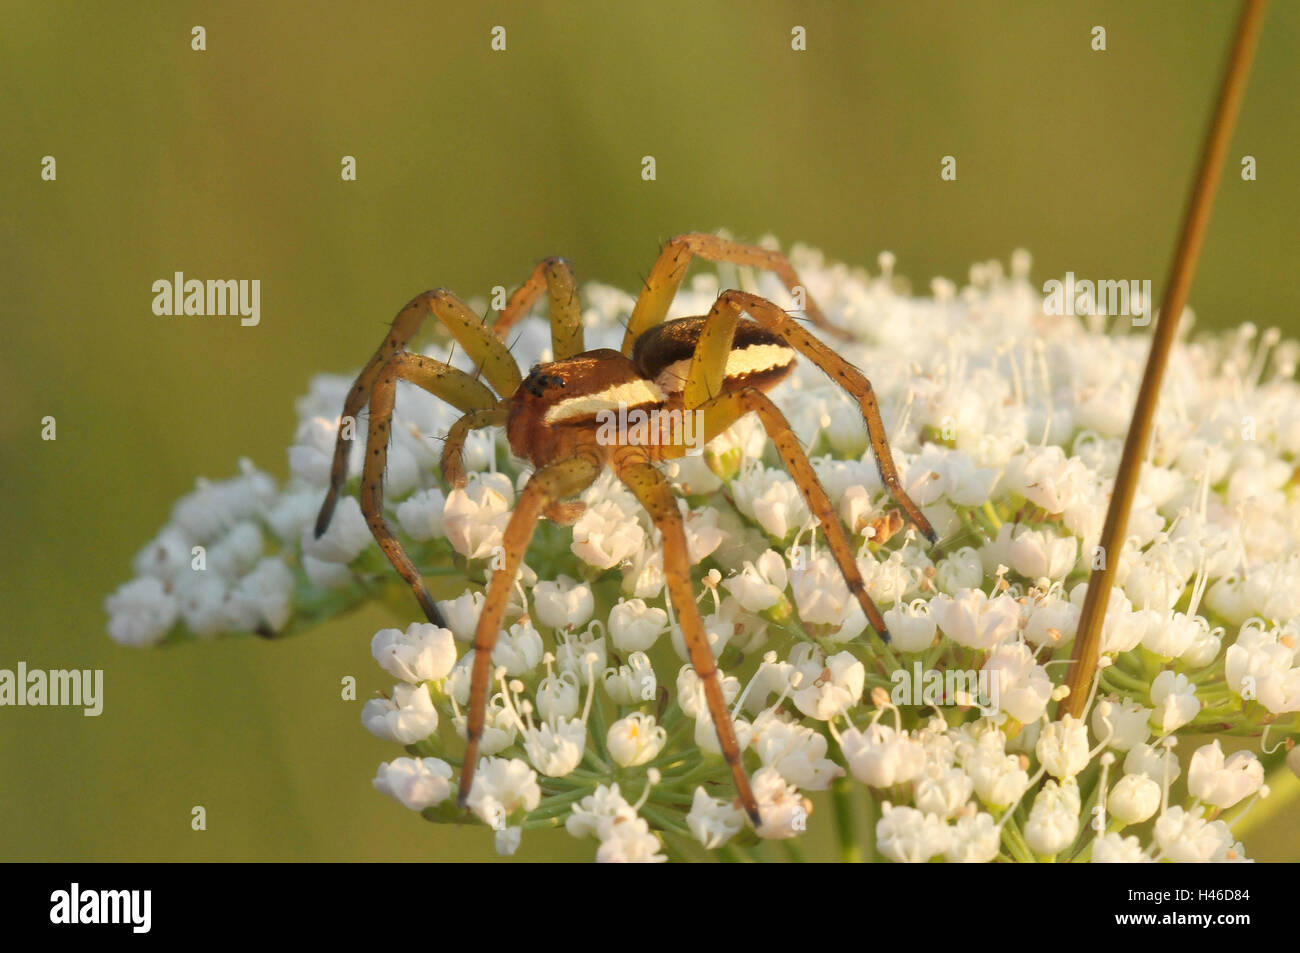 Gerandete hunting spider, one-year-old young animal on blossom, Stock Photo